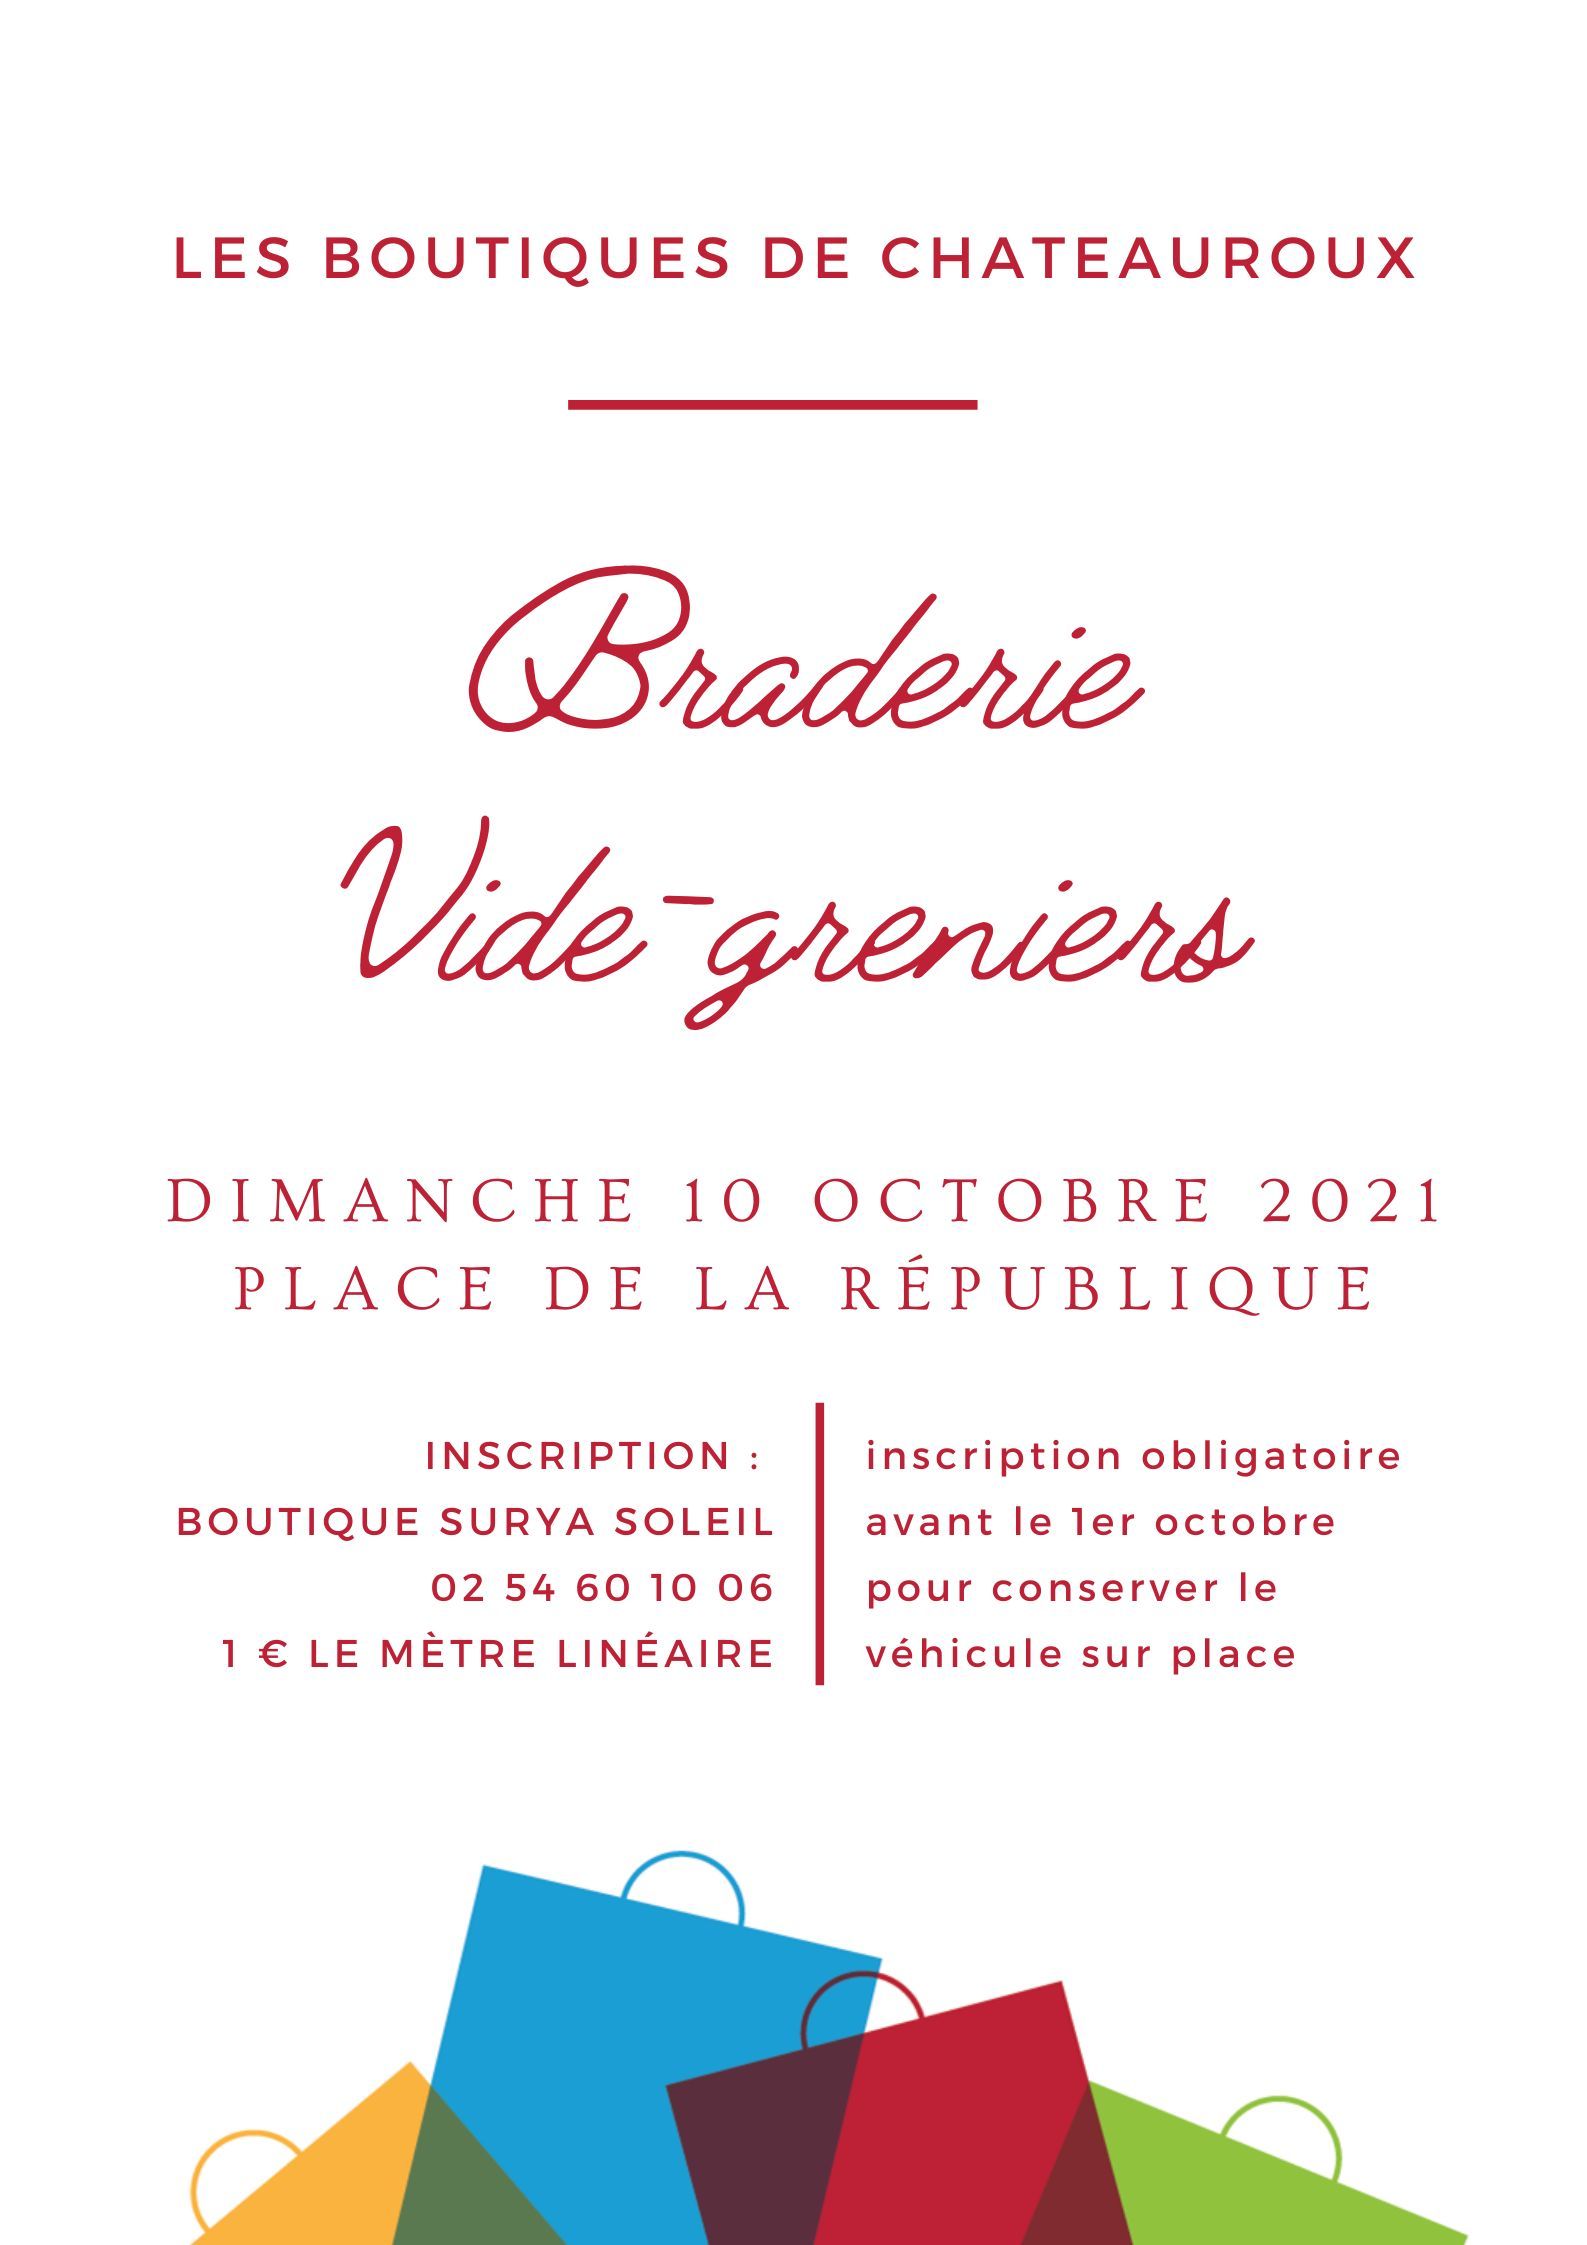 <br />
<b>Notice</b>:  Undefined variable: image in <b>/var/www/sites/site-boutiquesdechateauroux.h-and-co.fr/application/views/evenement/old.php</b> on line <b>44</b><br />
